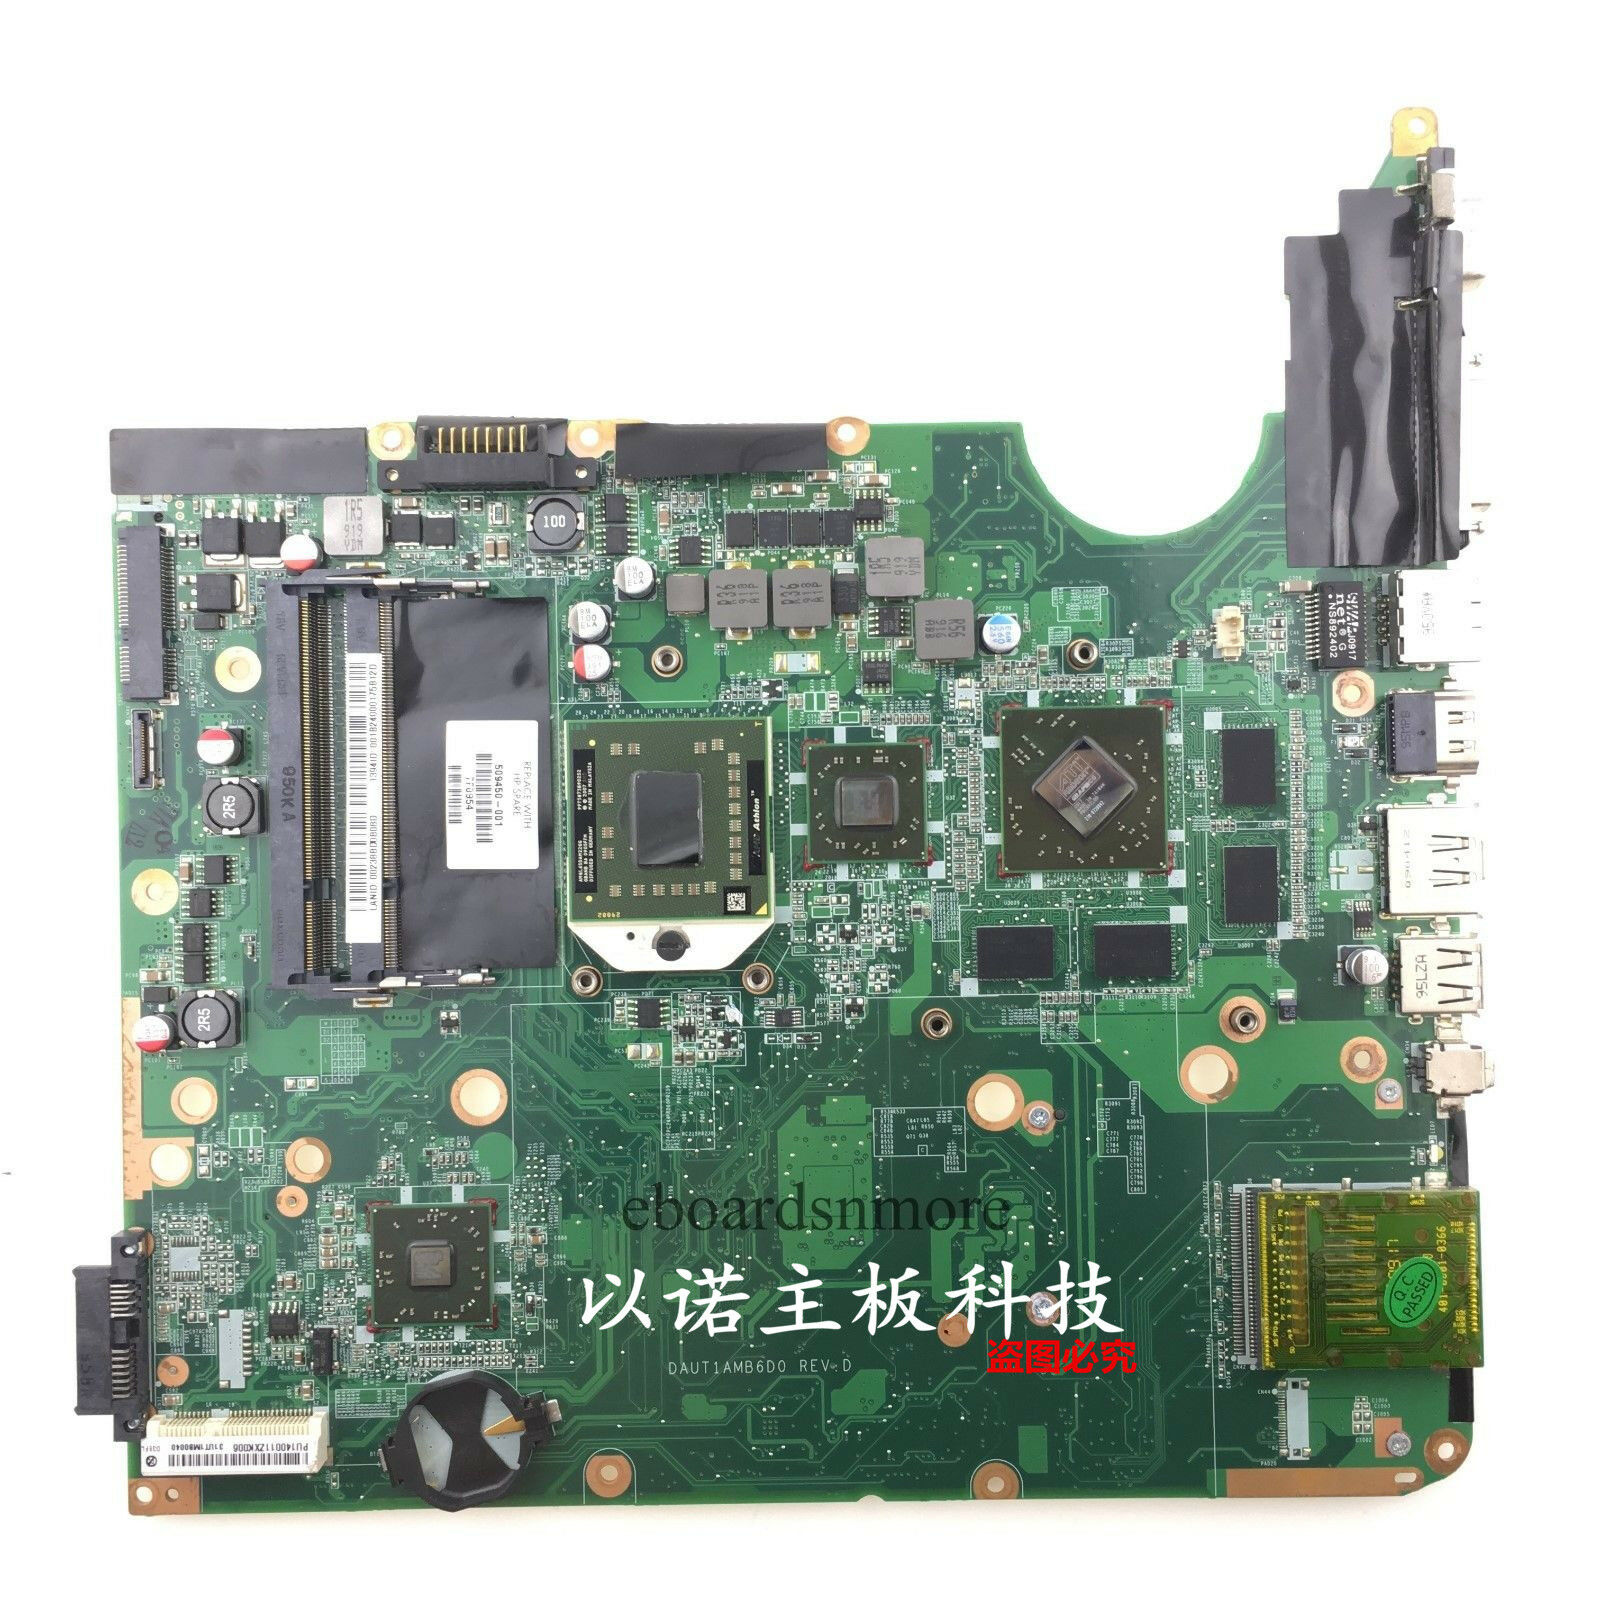 TESTED!!! HP DV6 2088DX 1264CA 1260SE 1268NR AMD MOTHERBOARD => 509450-001 Tracking Number is INCLUDED, and